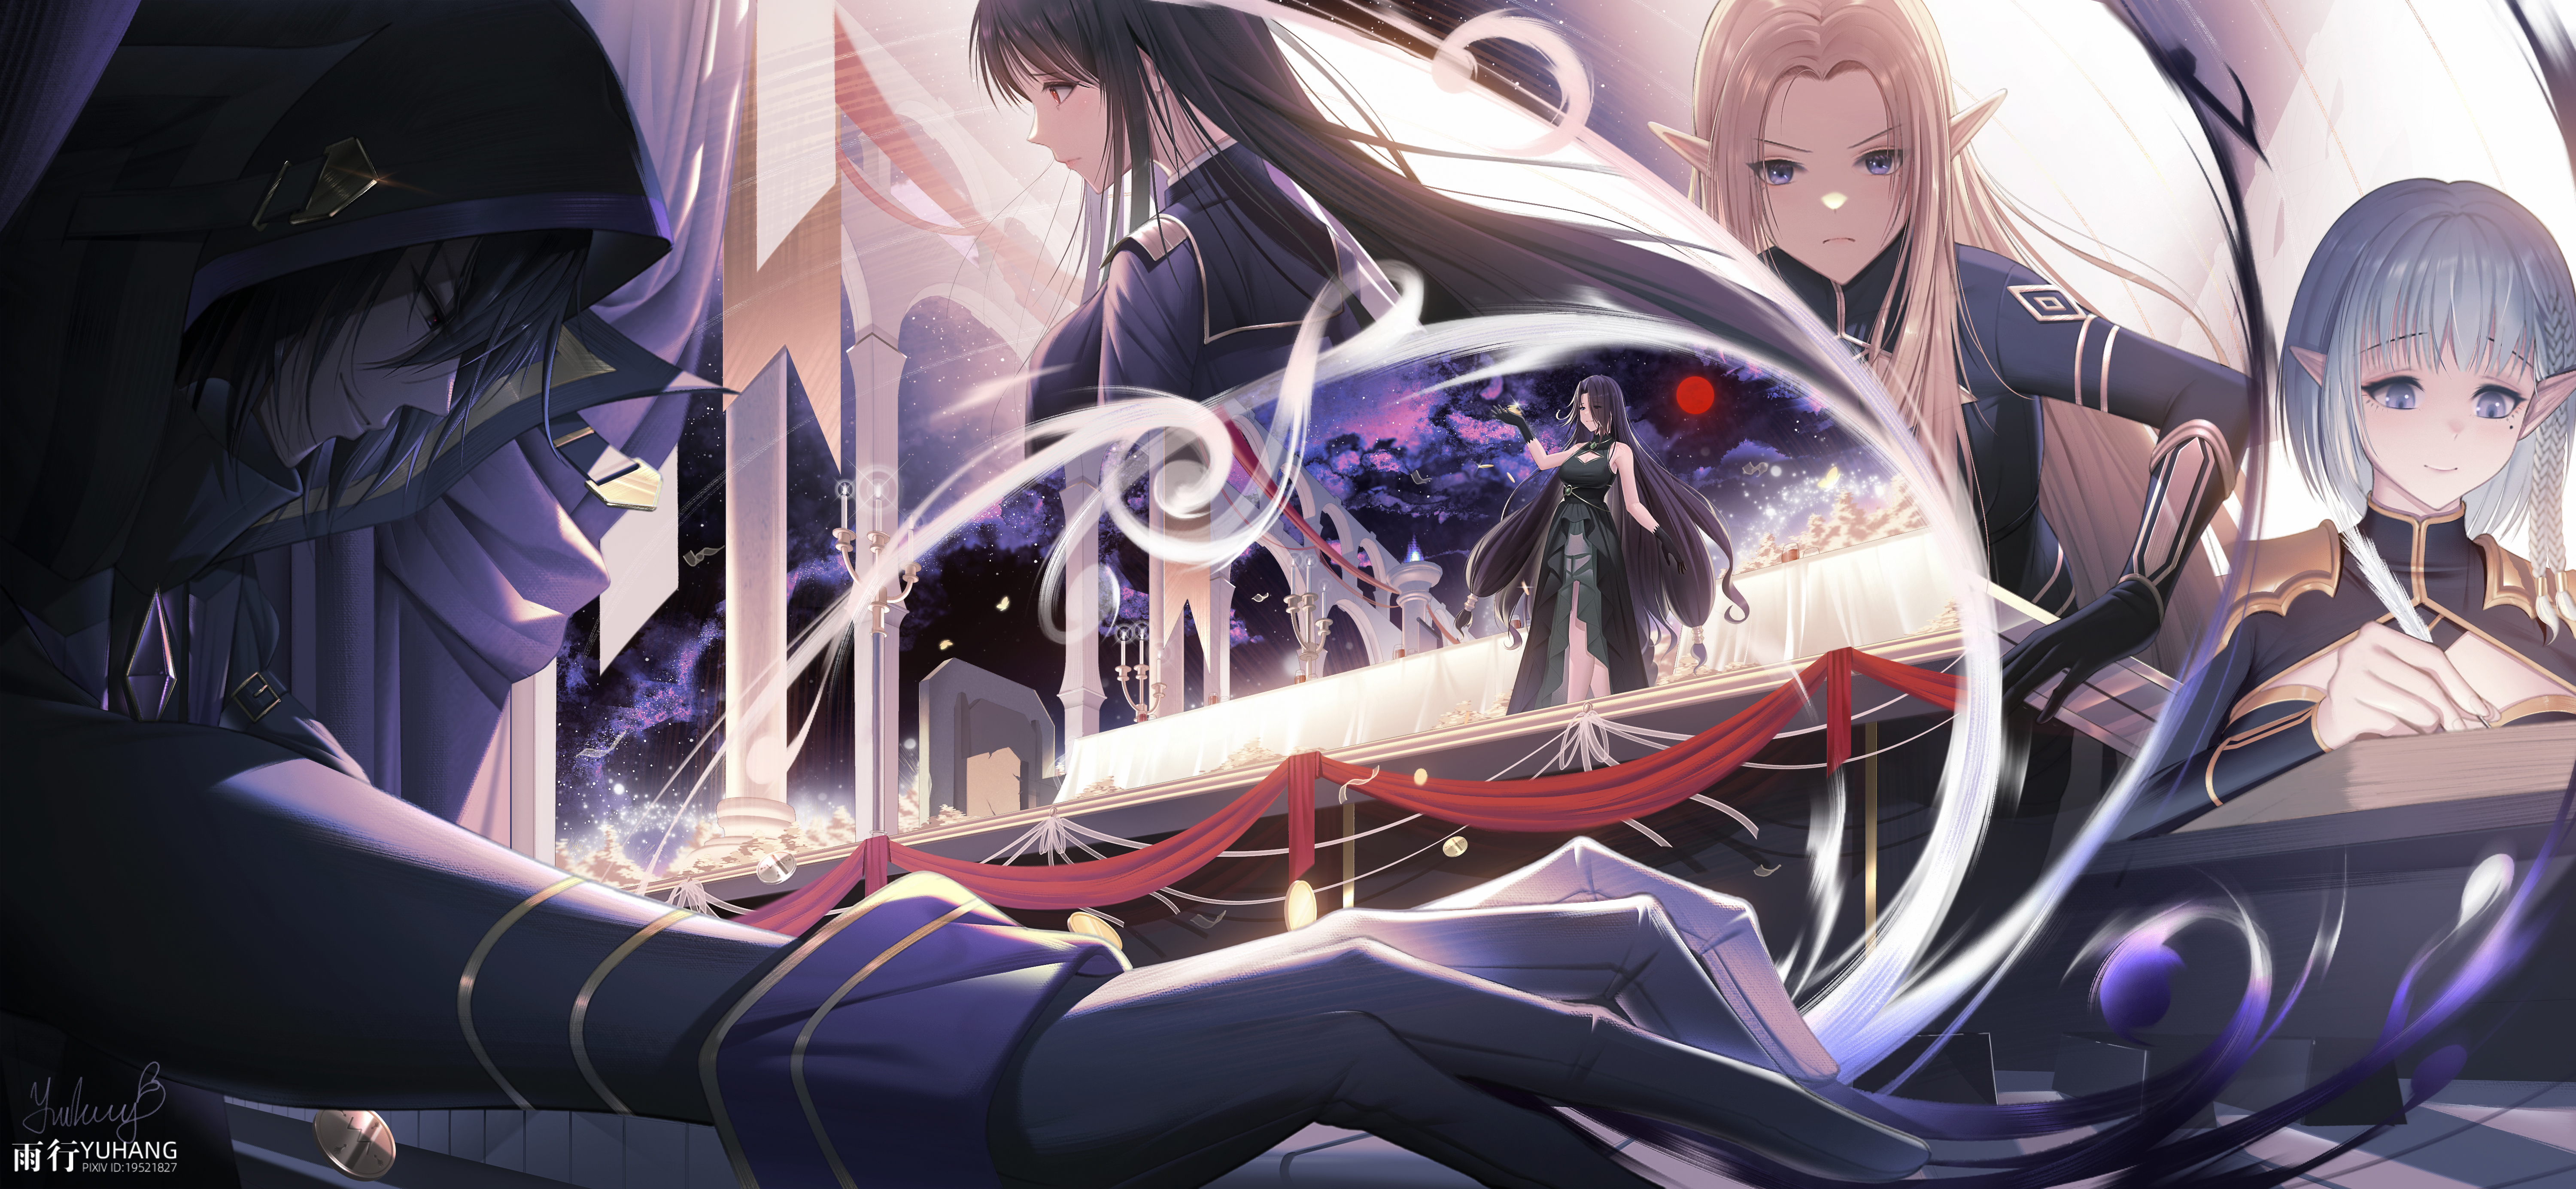 Anime Anime Girls The Eminence In Shadow 6000x2770